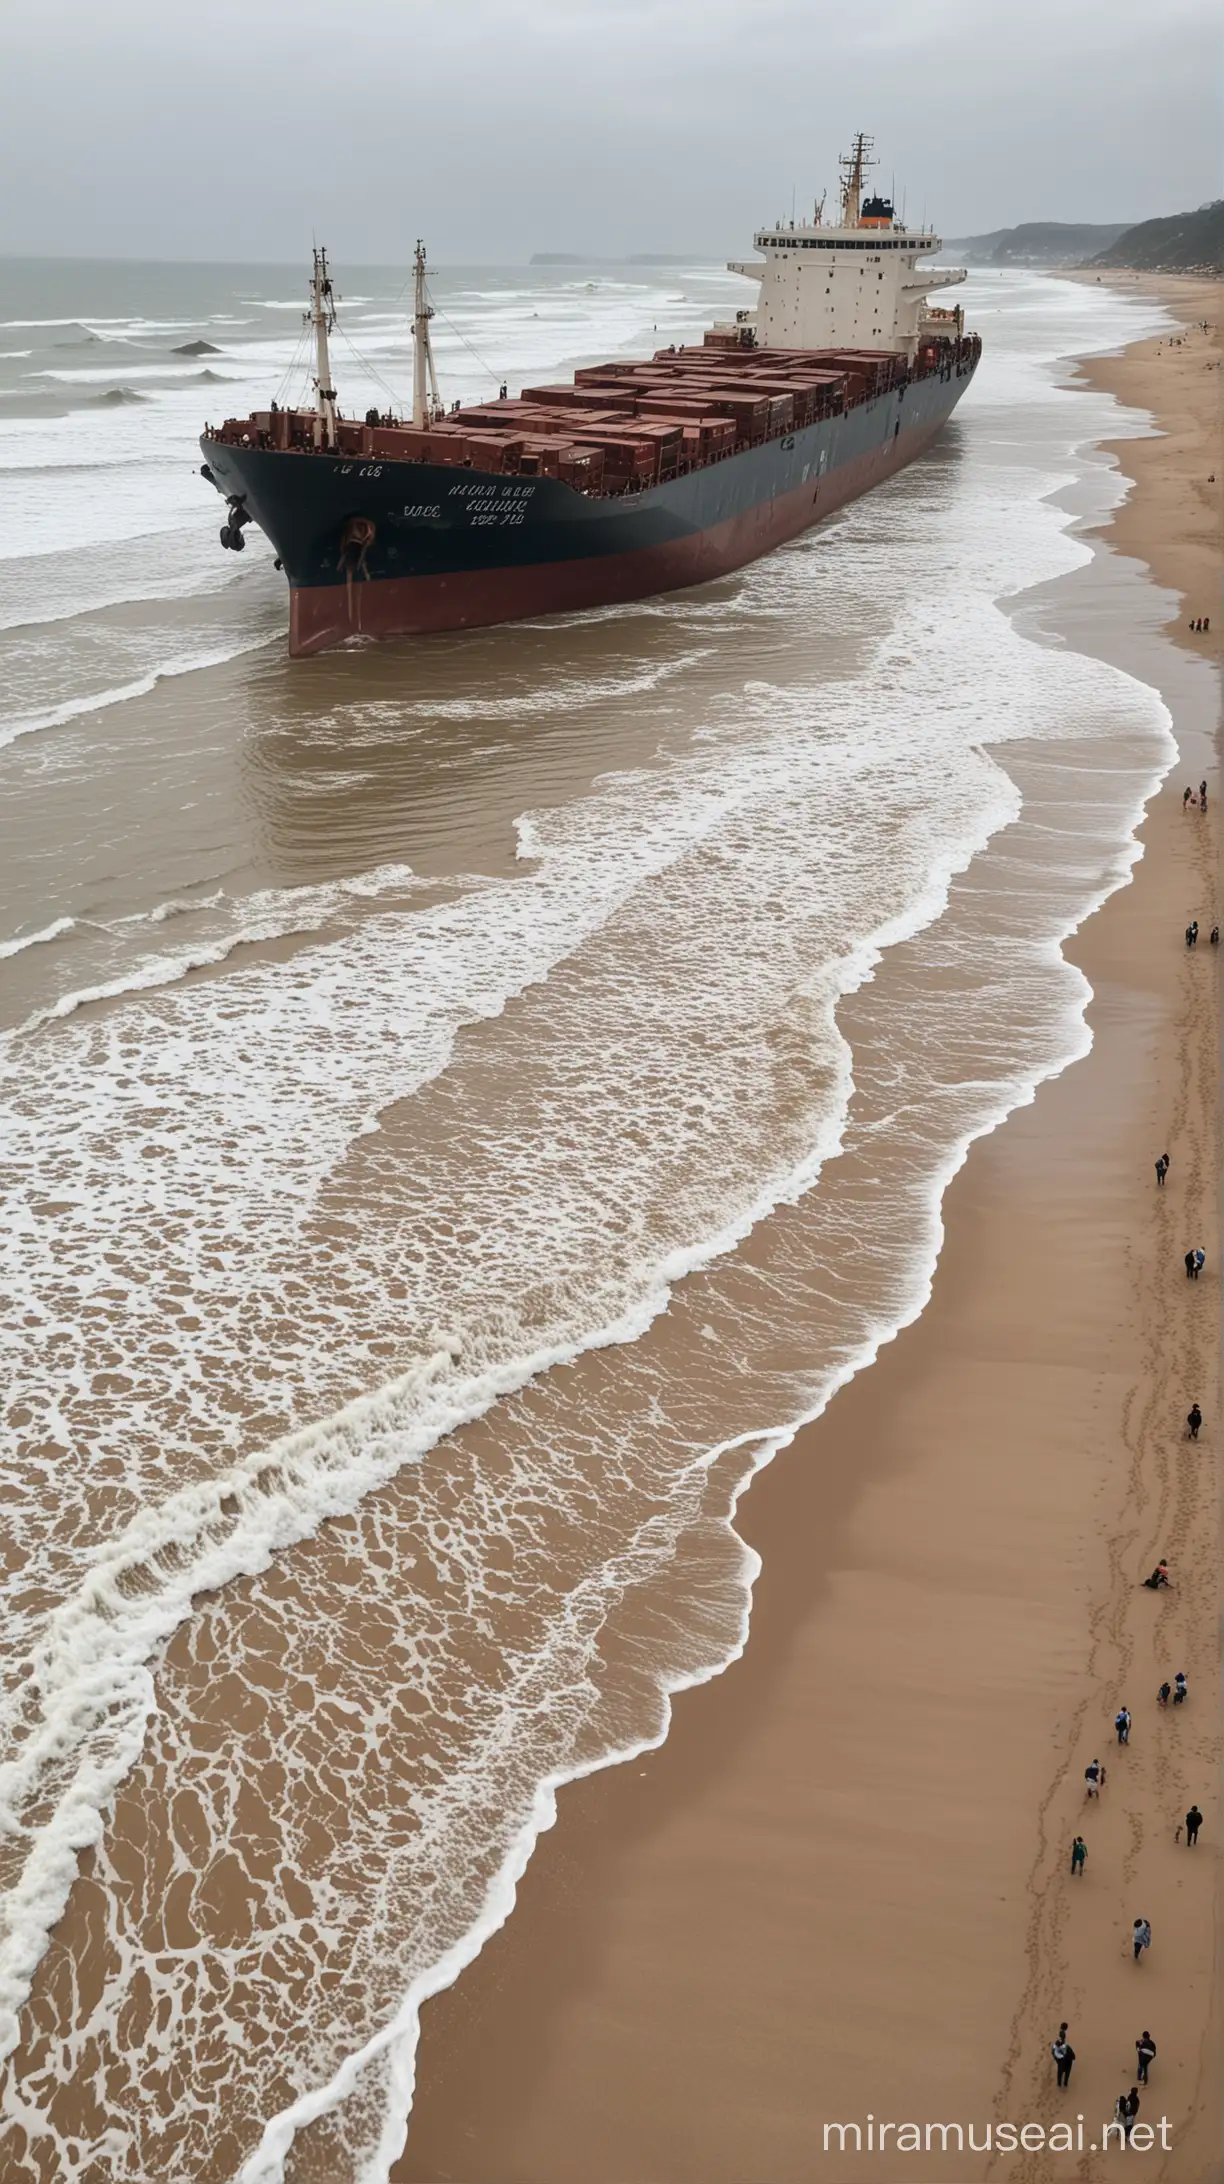 cargo ship stranded on the beach,seen was many people